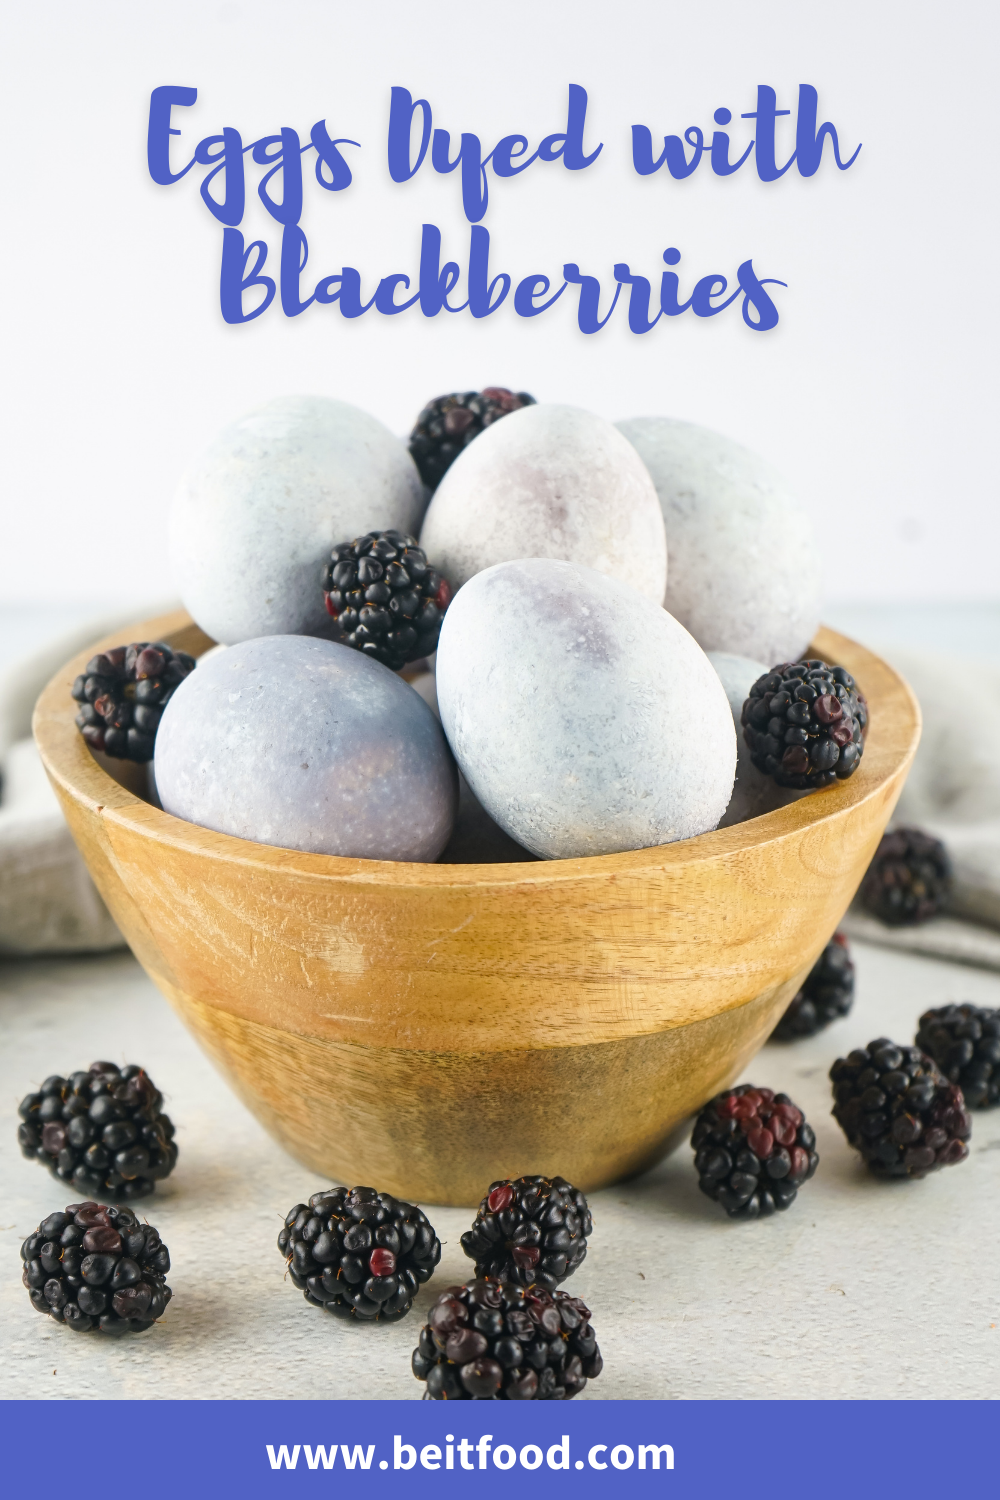 Eggs Dyed With Blackberries